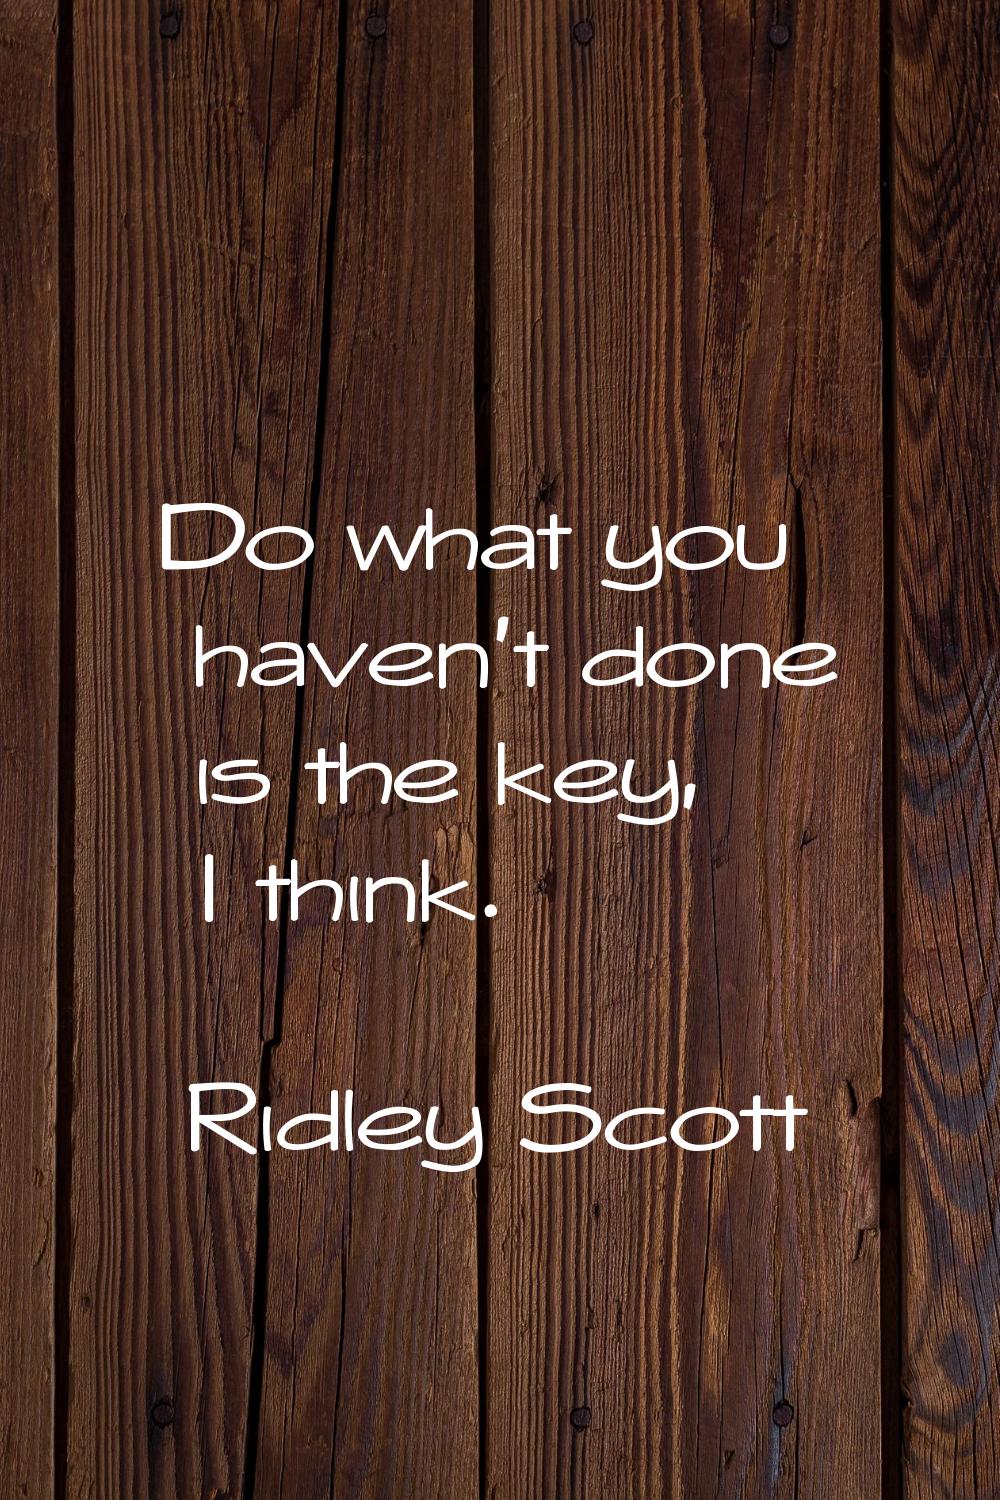 Do what you haven't done is the key, I think.